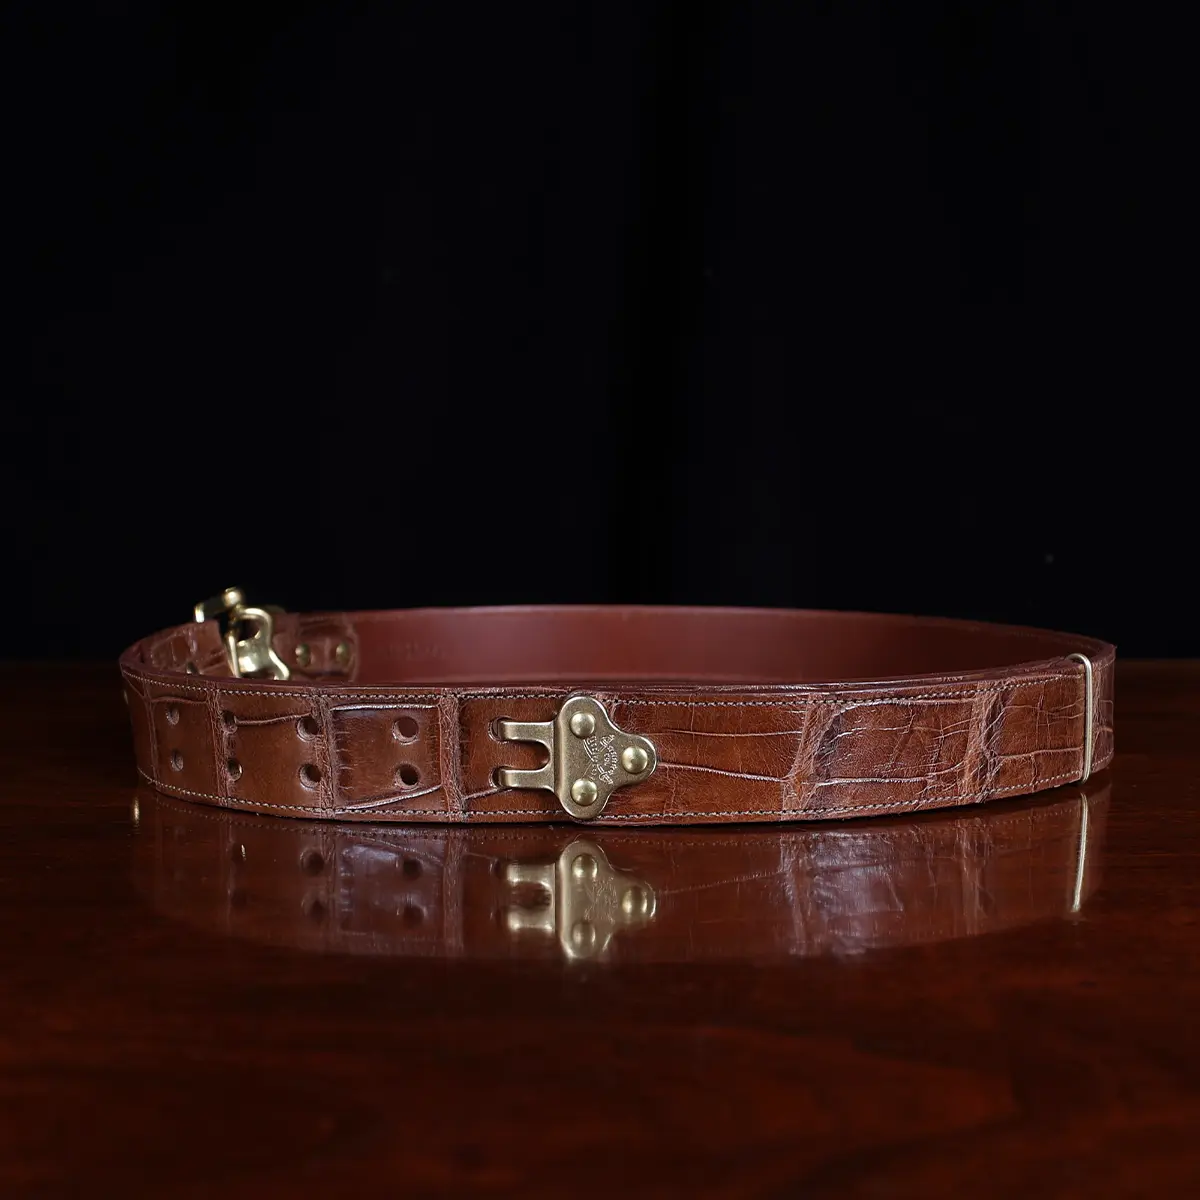 No. 5 Cinch Belt in brown American Alligator and brass buckle - ID 001 - side view on black background